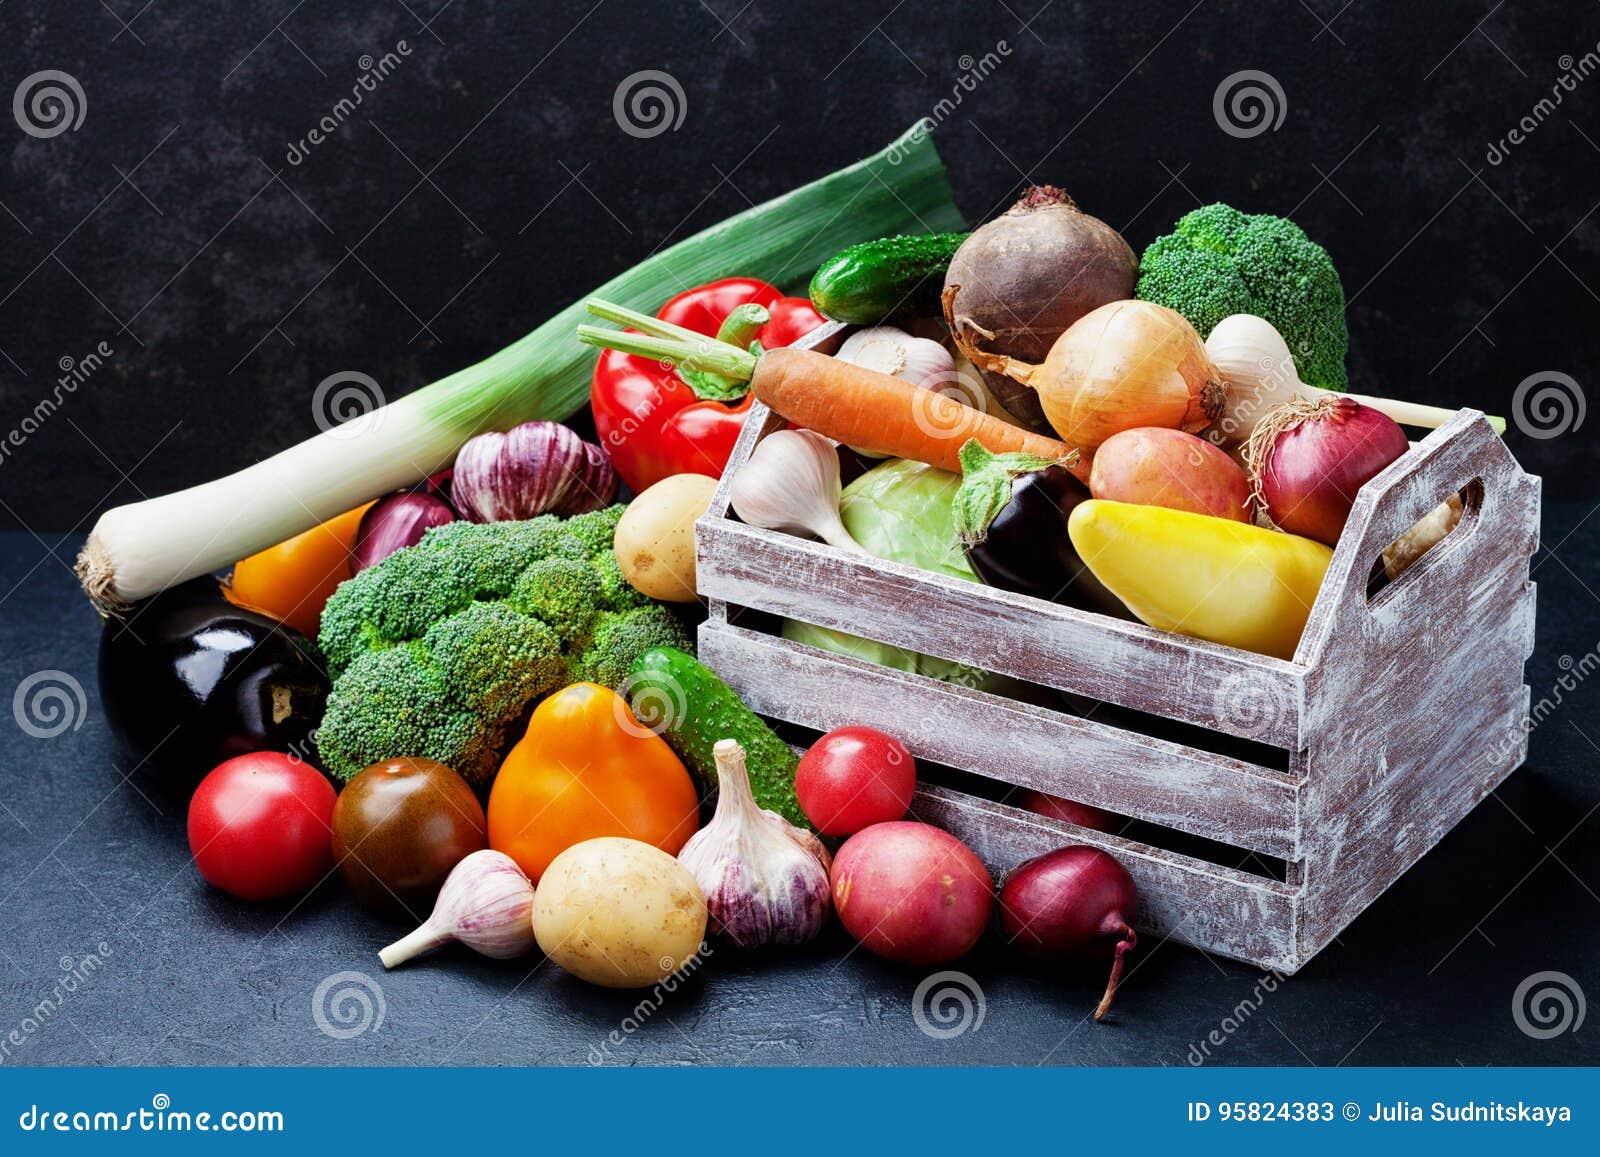 wooden box with autumn harvest farm vegetables and root crops on black kitchen table. healthy and organic food.